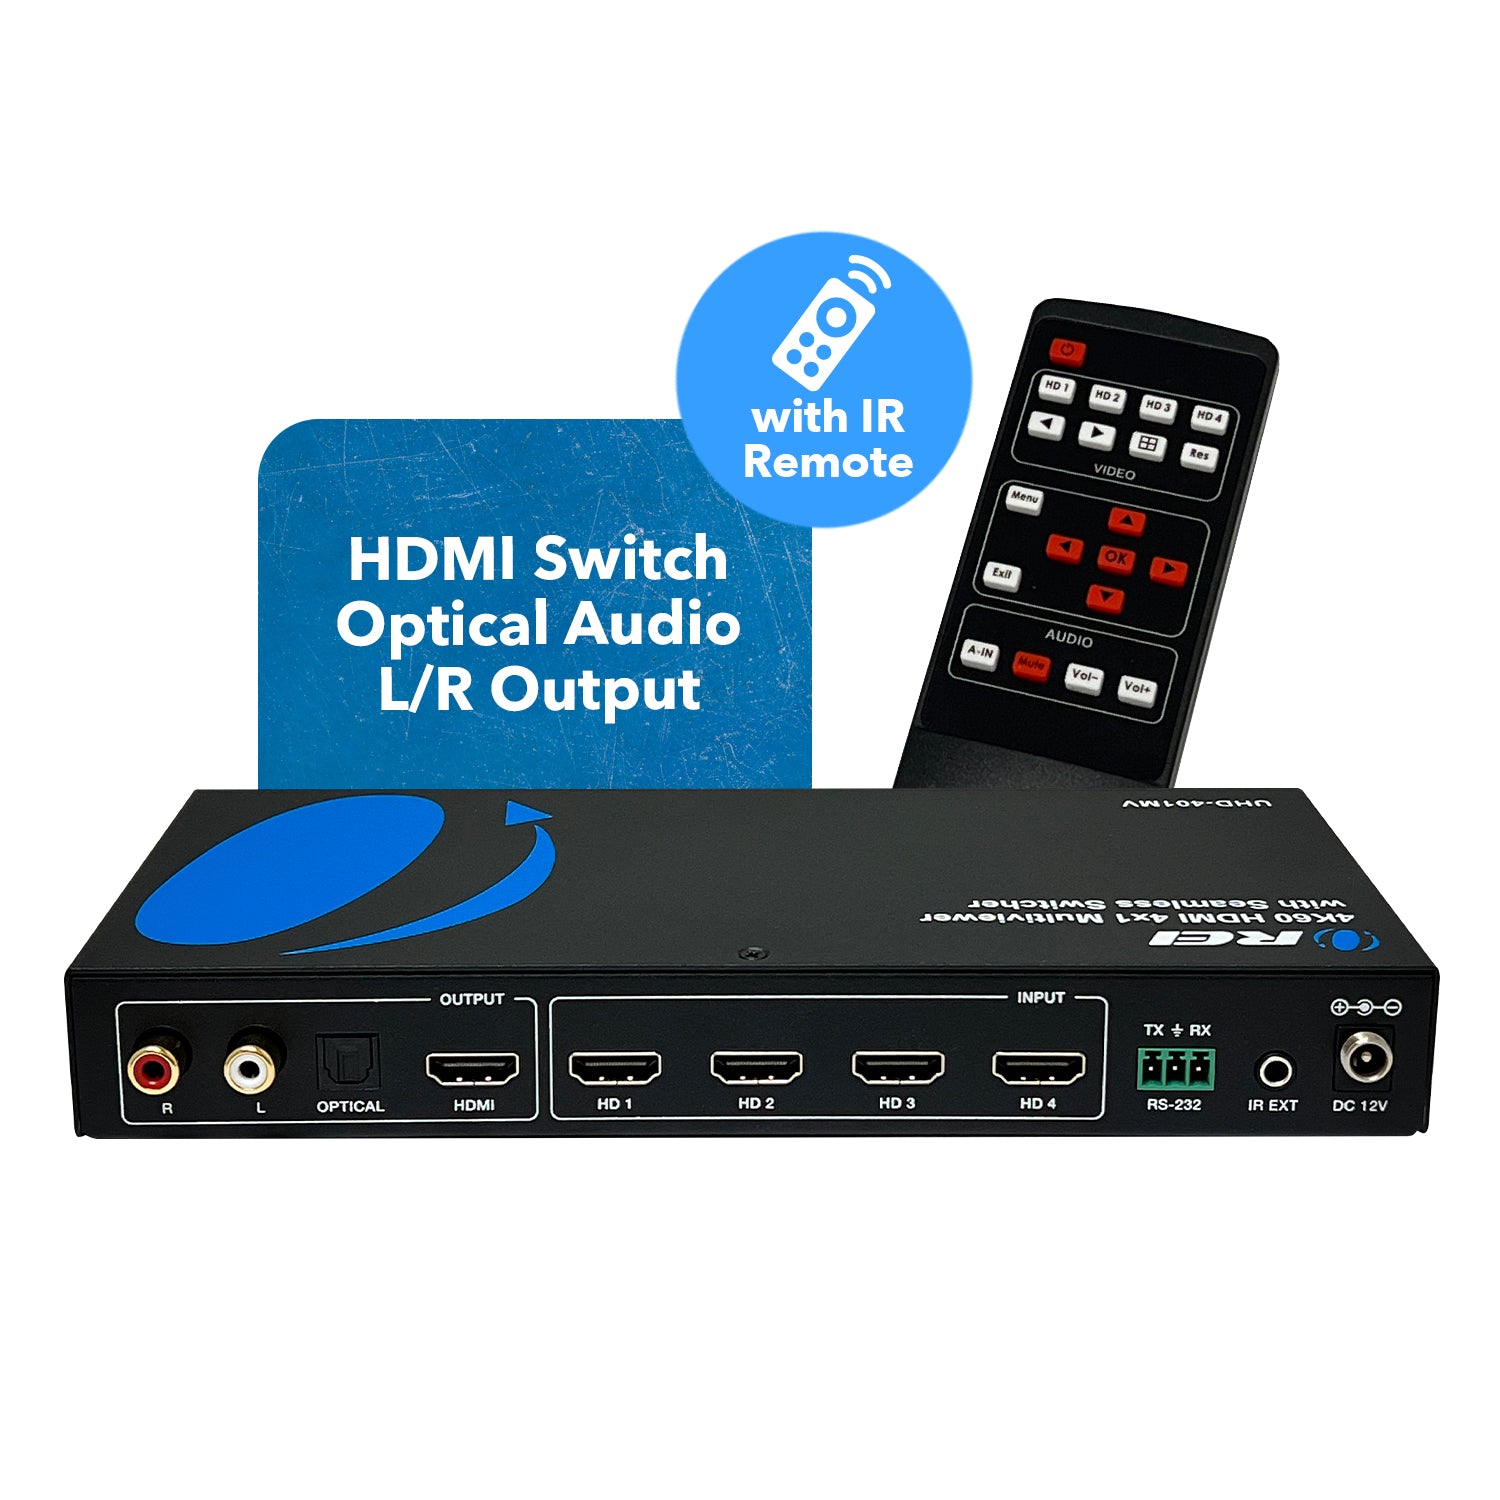 HDMI Multiviewer 4K 4X1 HDMI quad viewer 4 in 1 HDMI Multi-viewer seamless  hdmi switcher Switch with Remote conttrol and scaler